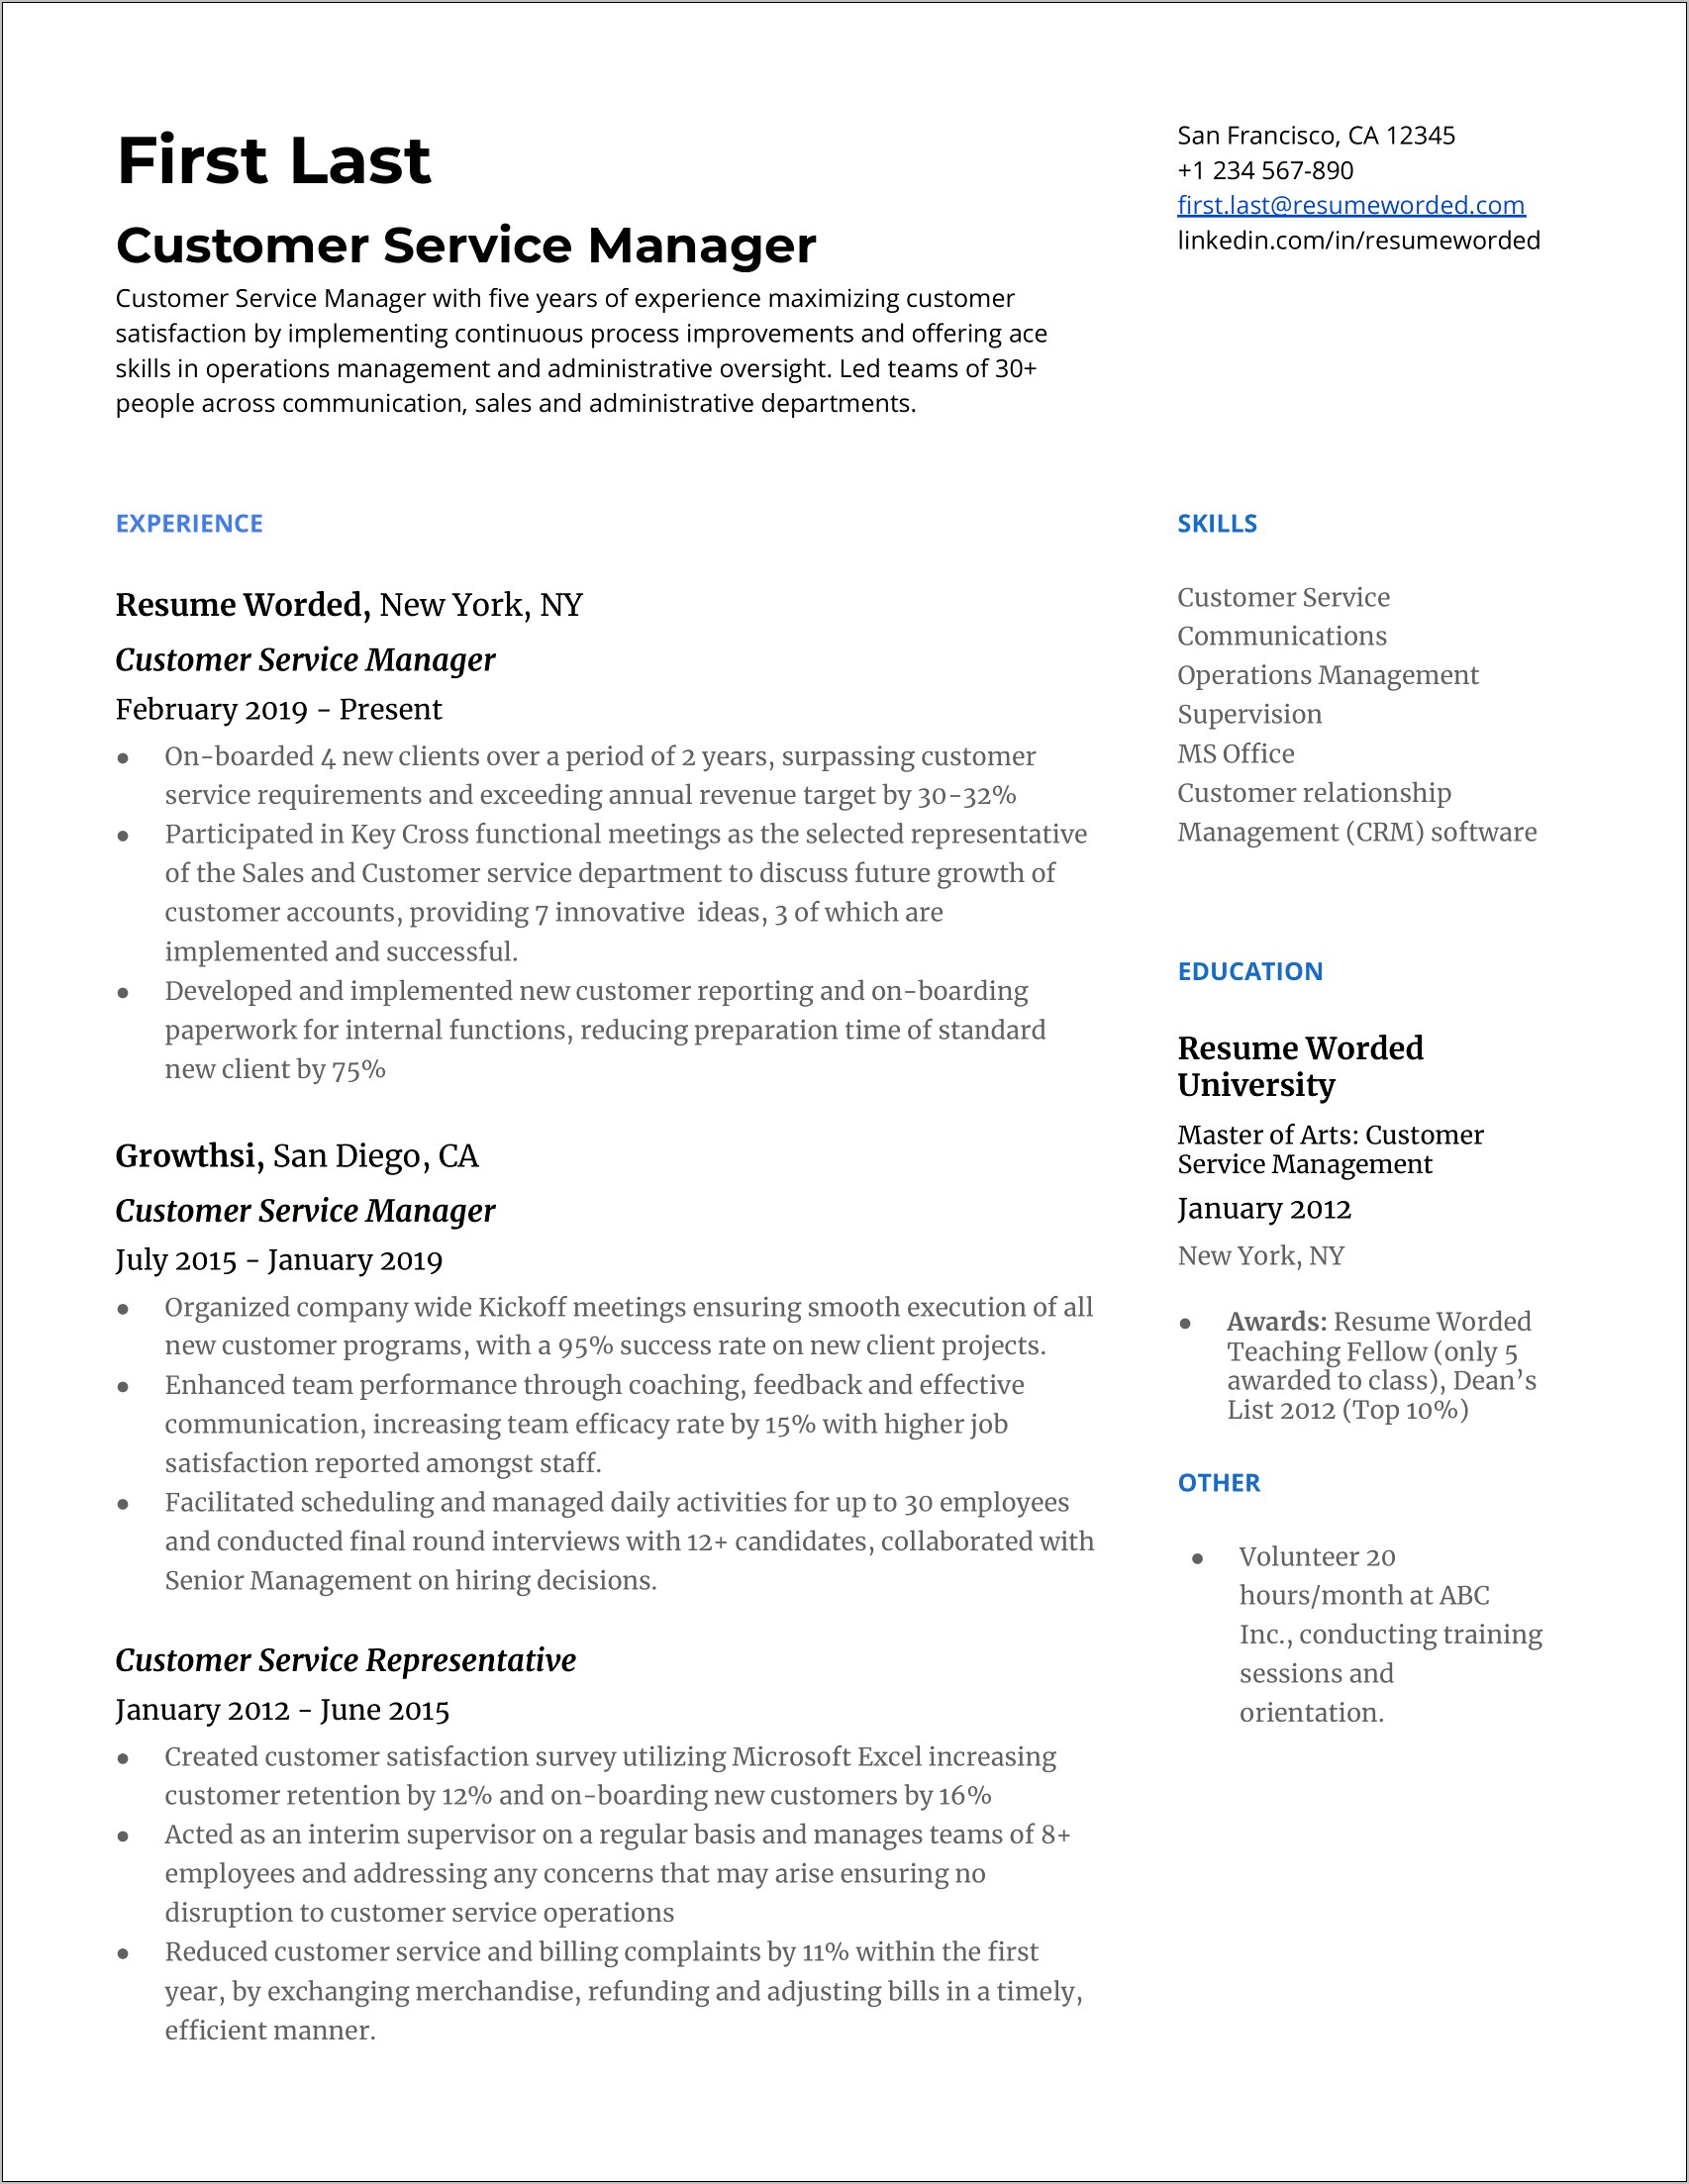 Examples Of Measurable Results On A Resume